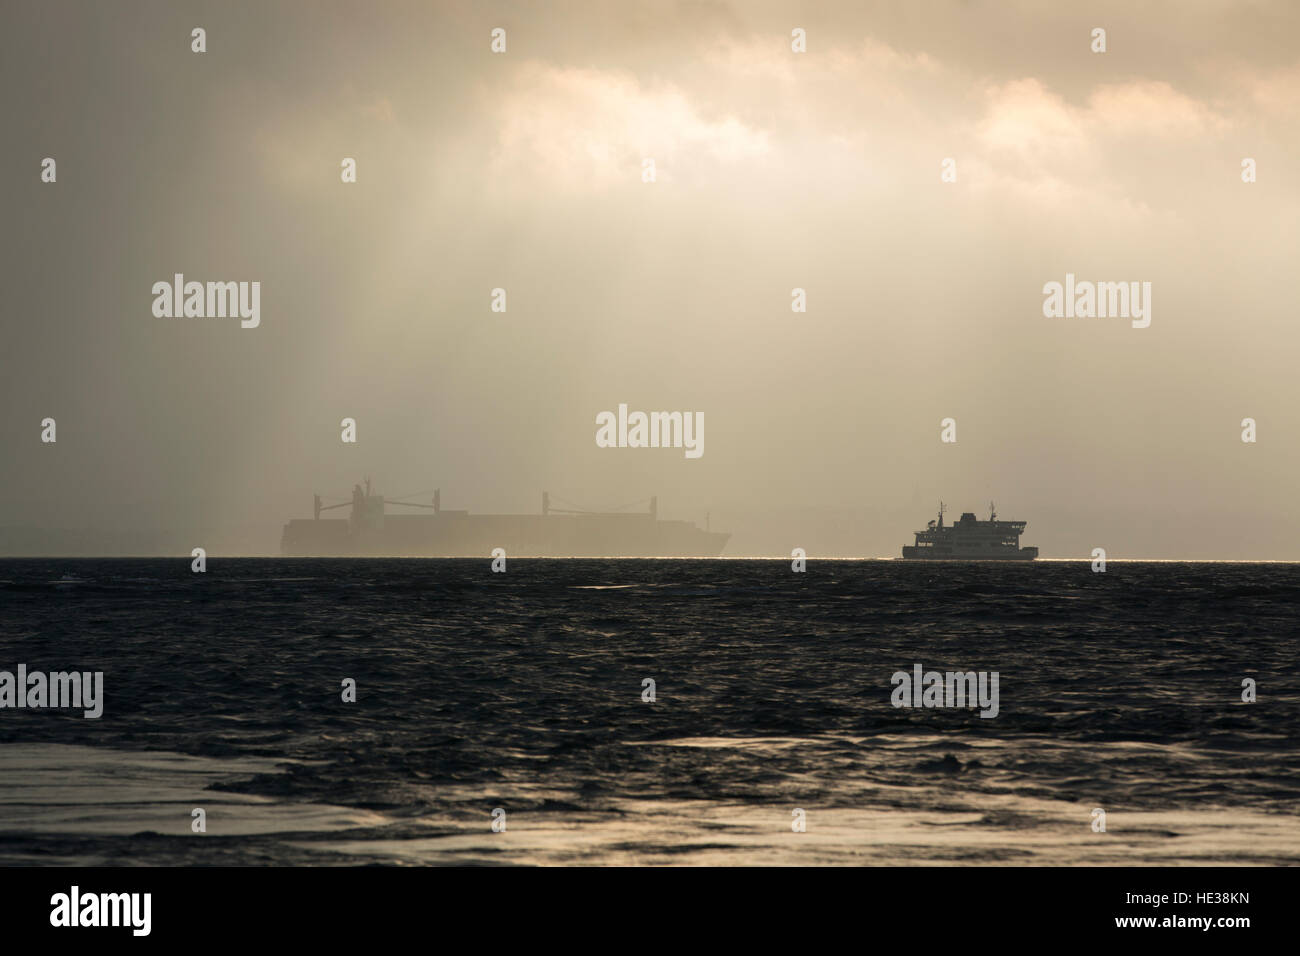 Break in the storm in the Solent. Outlines of a bulk carrier and car ferry on the horizon on this dark day with light breaking. Stock Photo